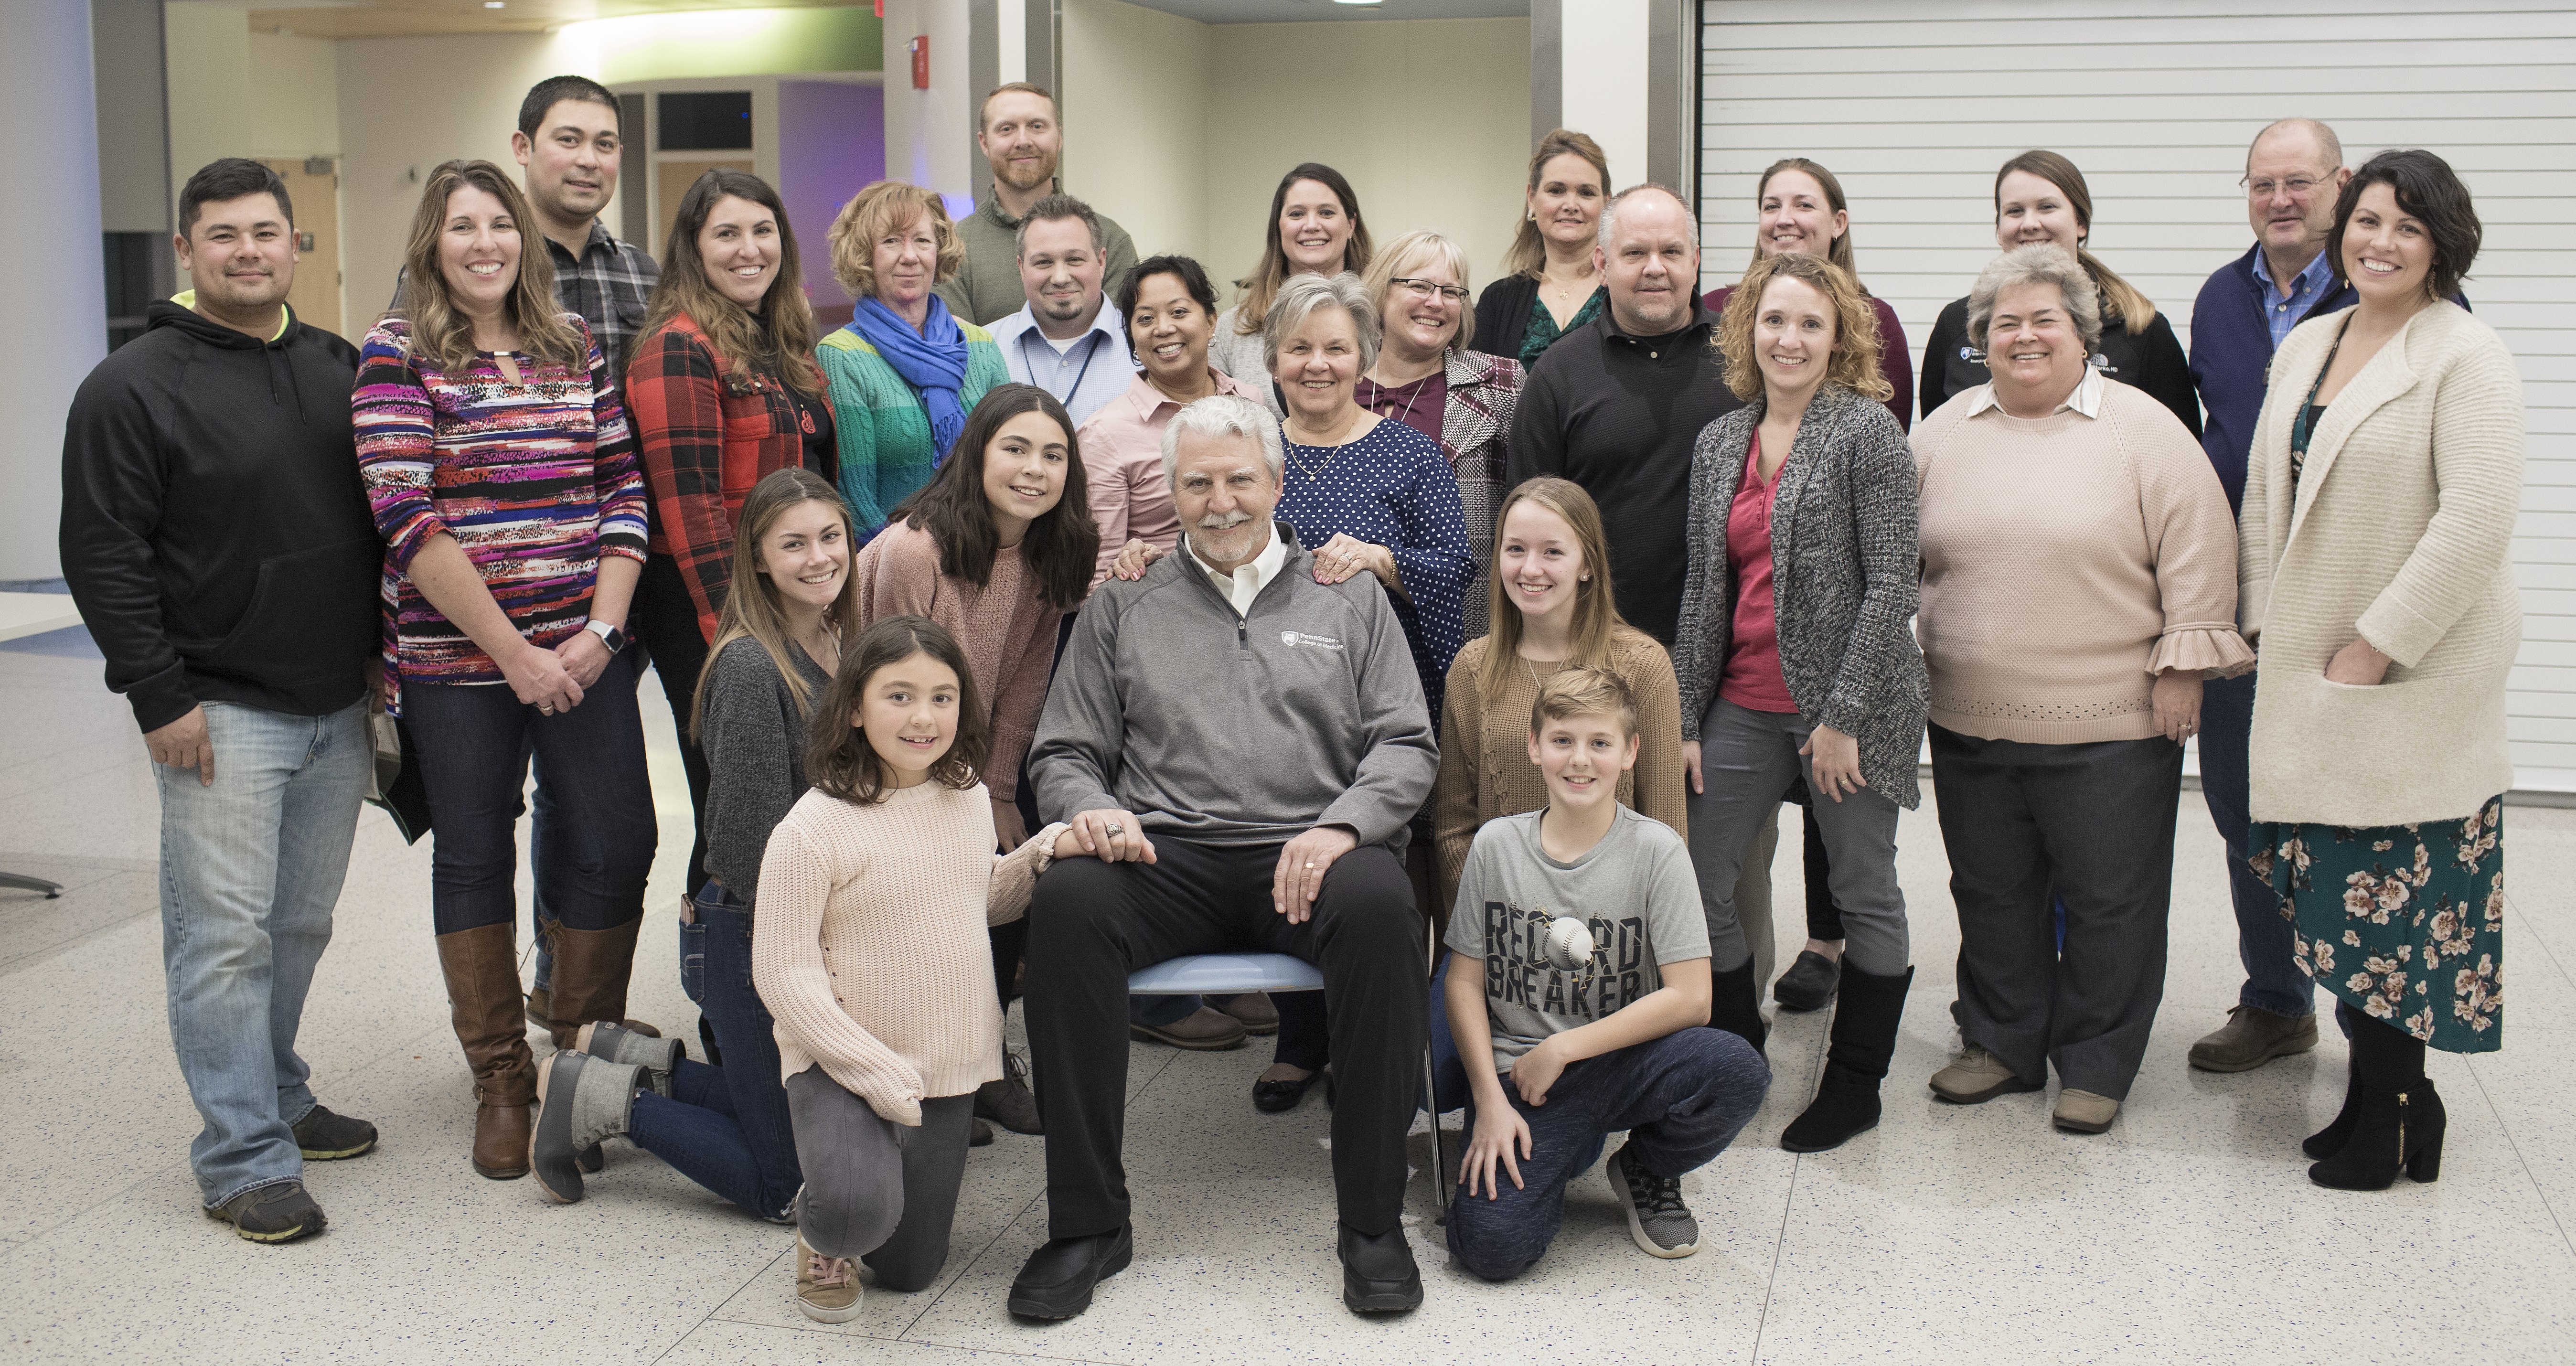 Ed Frederick and his family pose for a photo with the staff at Penn State Health Milton S. Hershey Medical Center during the first “See Me Now” program. He is wearing a gray sweatshirt, collared shirt and slacks. Ed has white hair and a moustache and is seated in a chair in the middle of a group of 23 men, women and children.